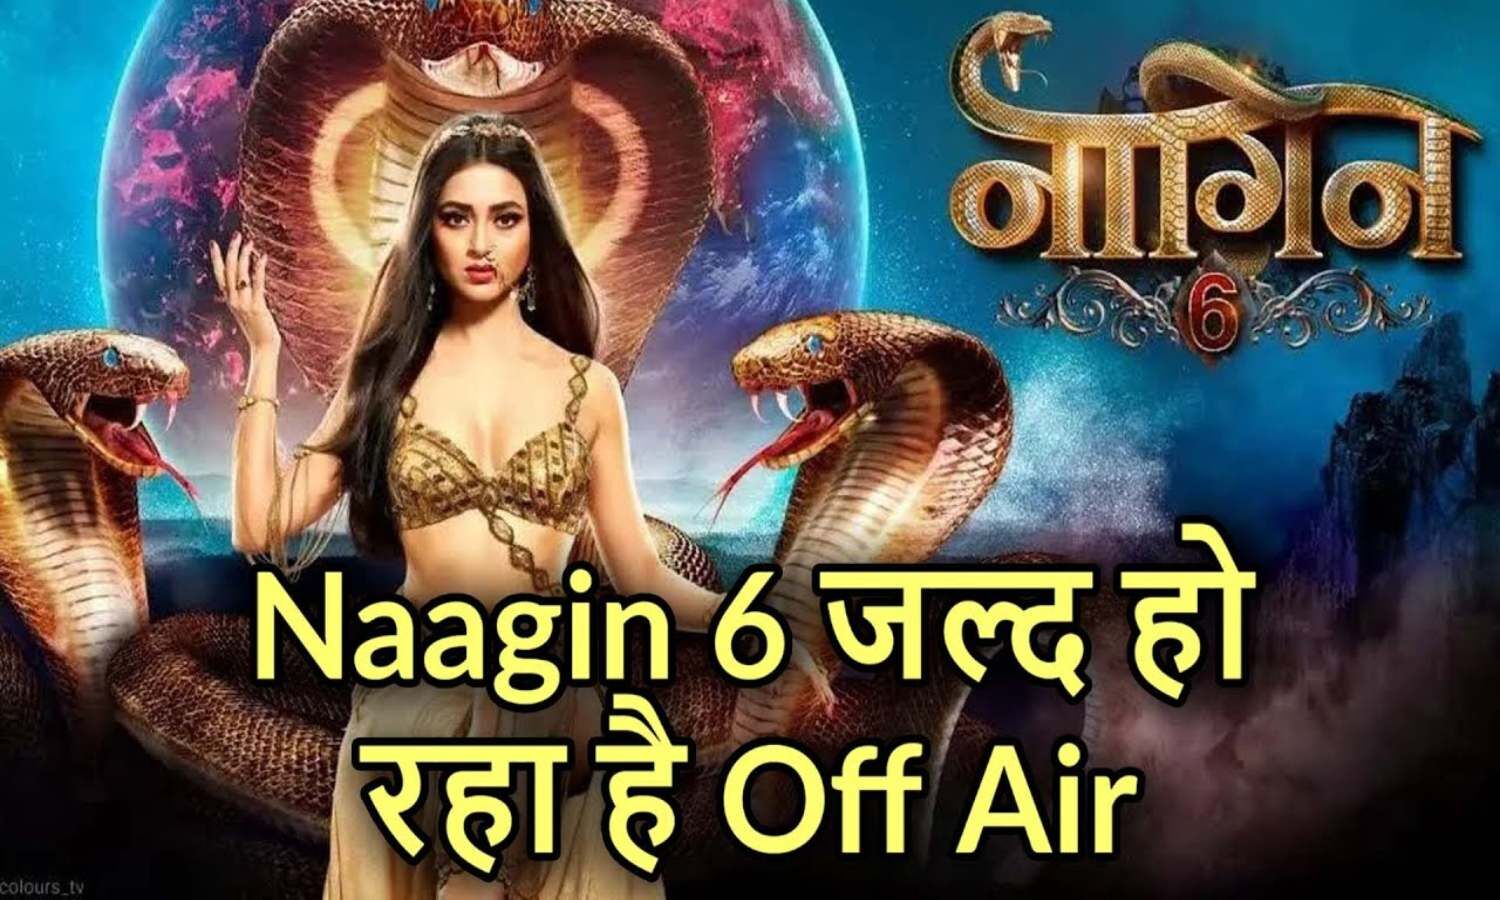 Naagin 6: Tejaswi Prakash’s show Naagin 6 is going to go off air soon, will take a generation leap